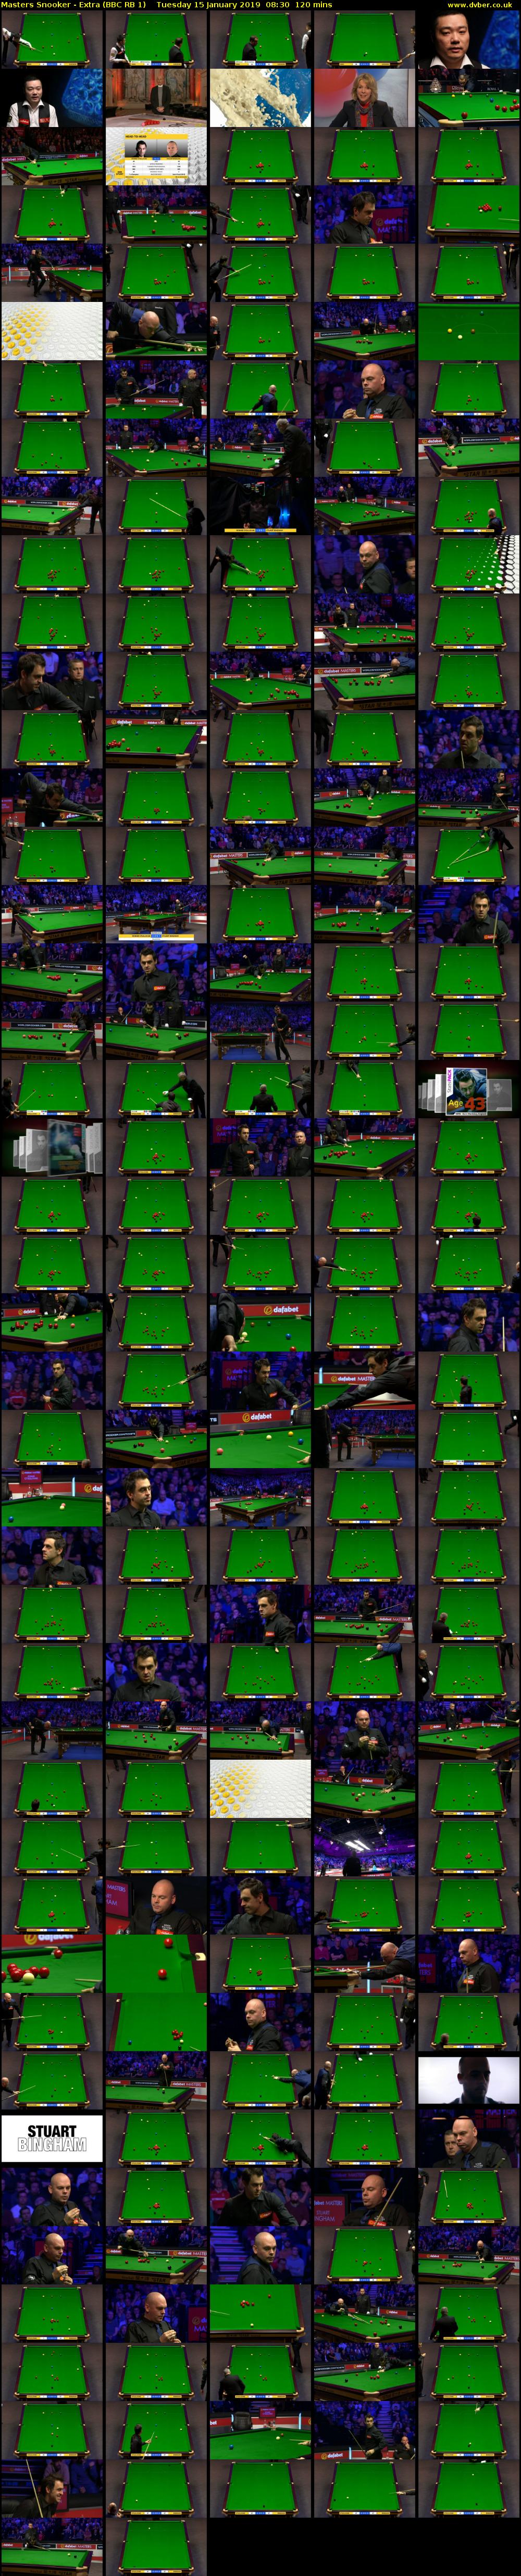 Masters Snooker - Extra (BBC RB 1) Tuesday 15 January 2019 08:30 - 10:30